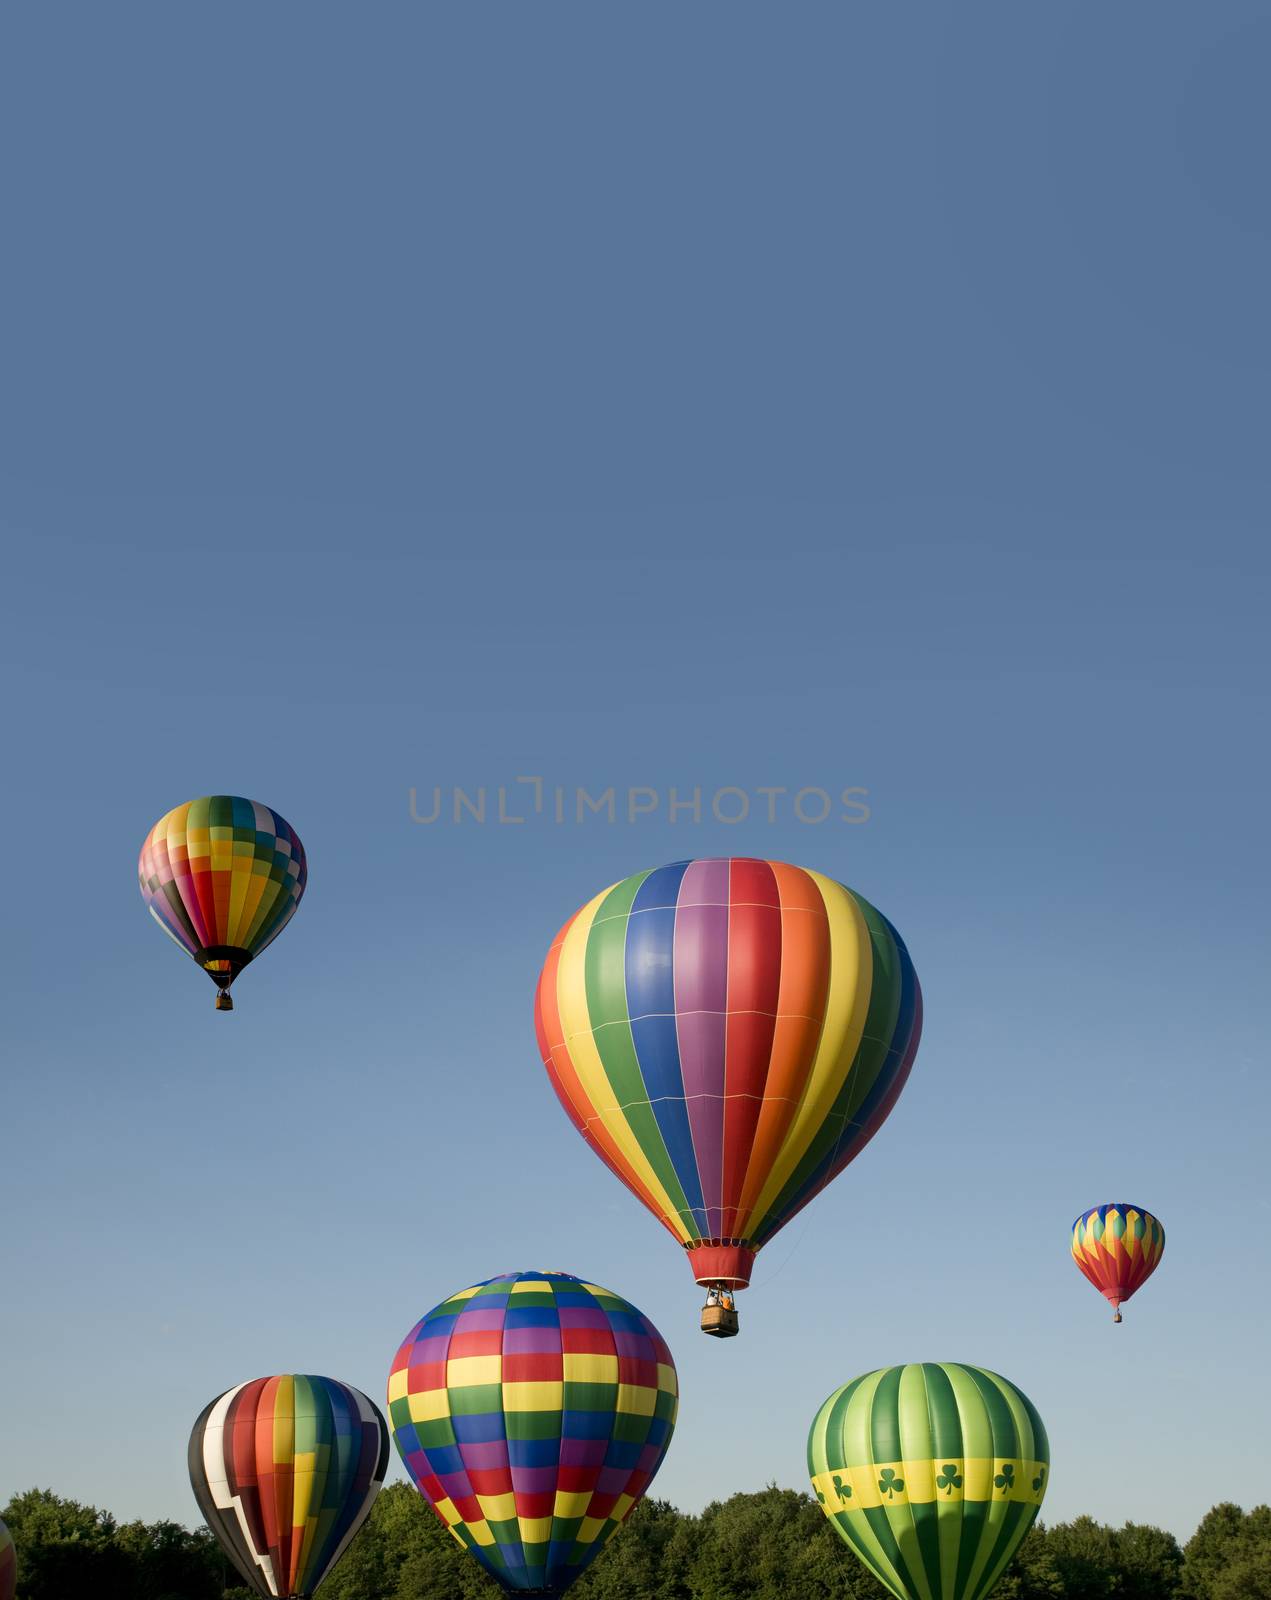 Various hot-air balloons with colorful envelopes ascending or launching at a ballooning festival